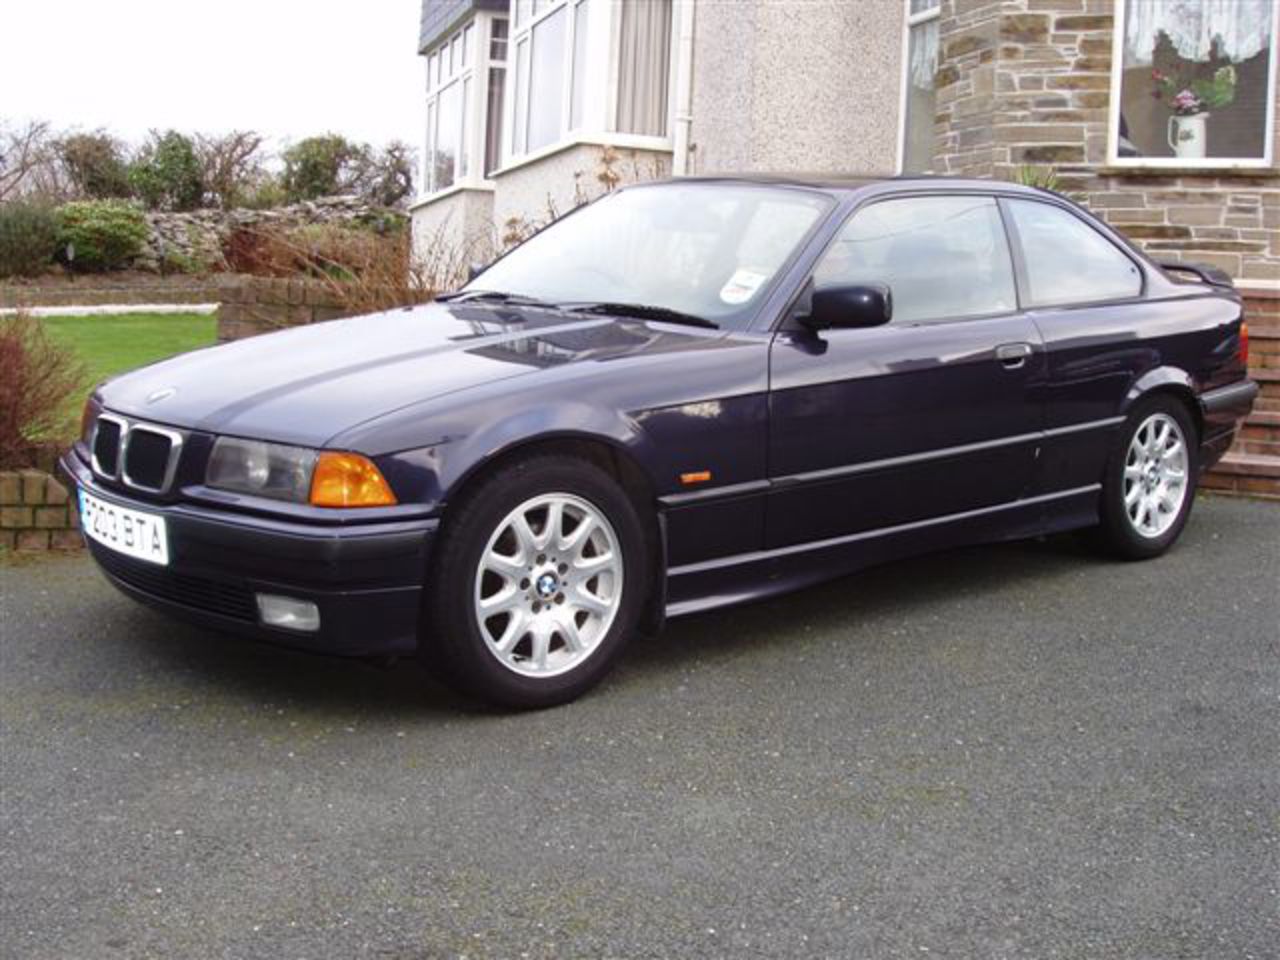 SOLD ** 1997 BMW 328i Coupe, two previous owners with full BMW service